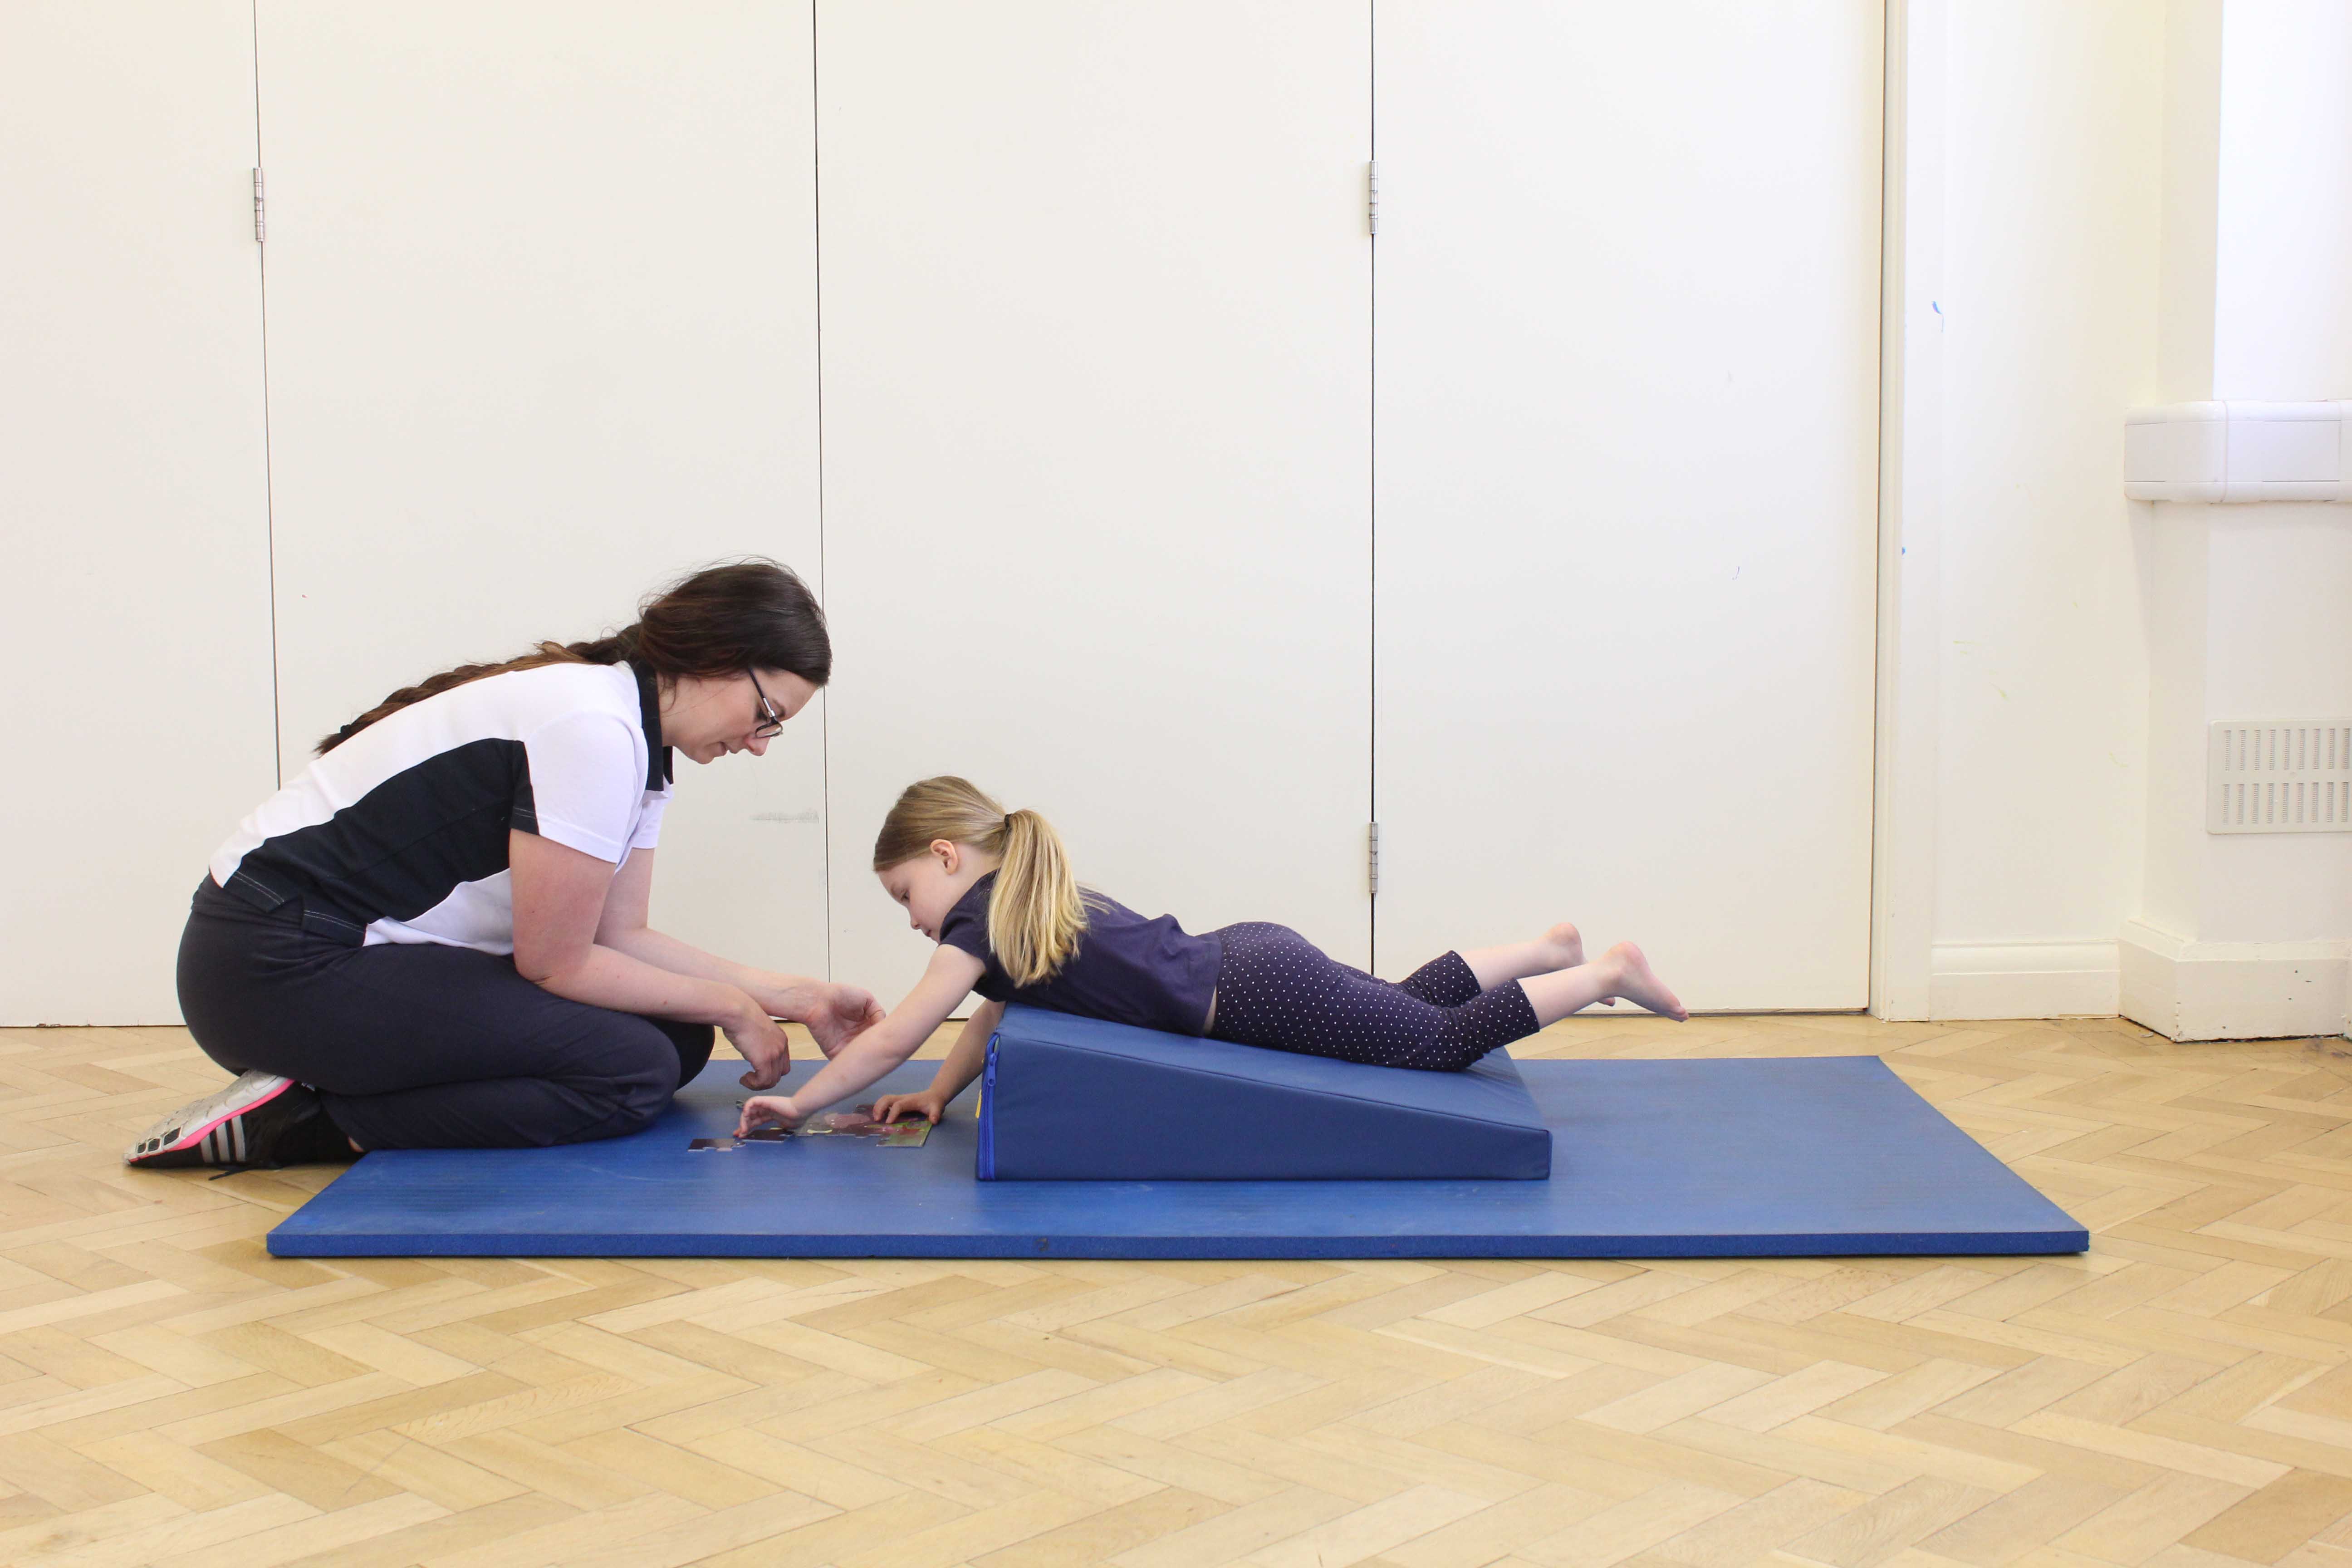 Functional rehabilitation exercises supervised by a specilaist physiotherapist